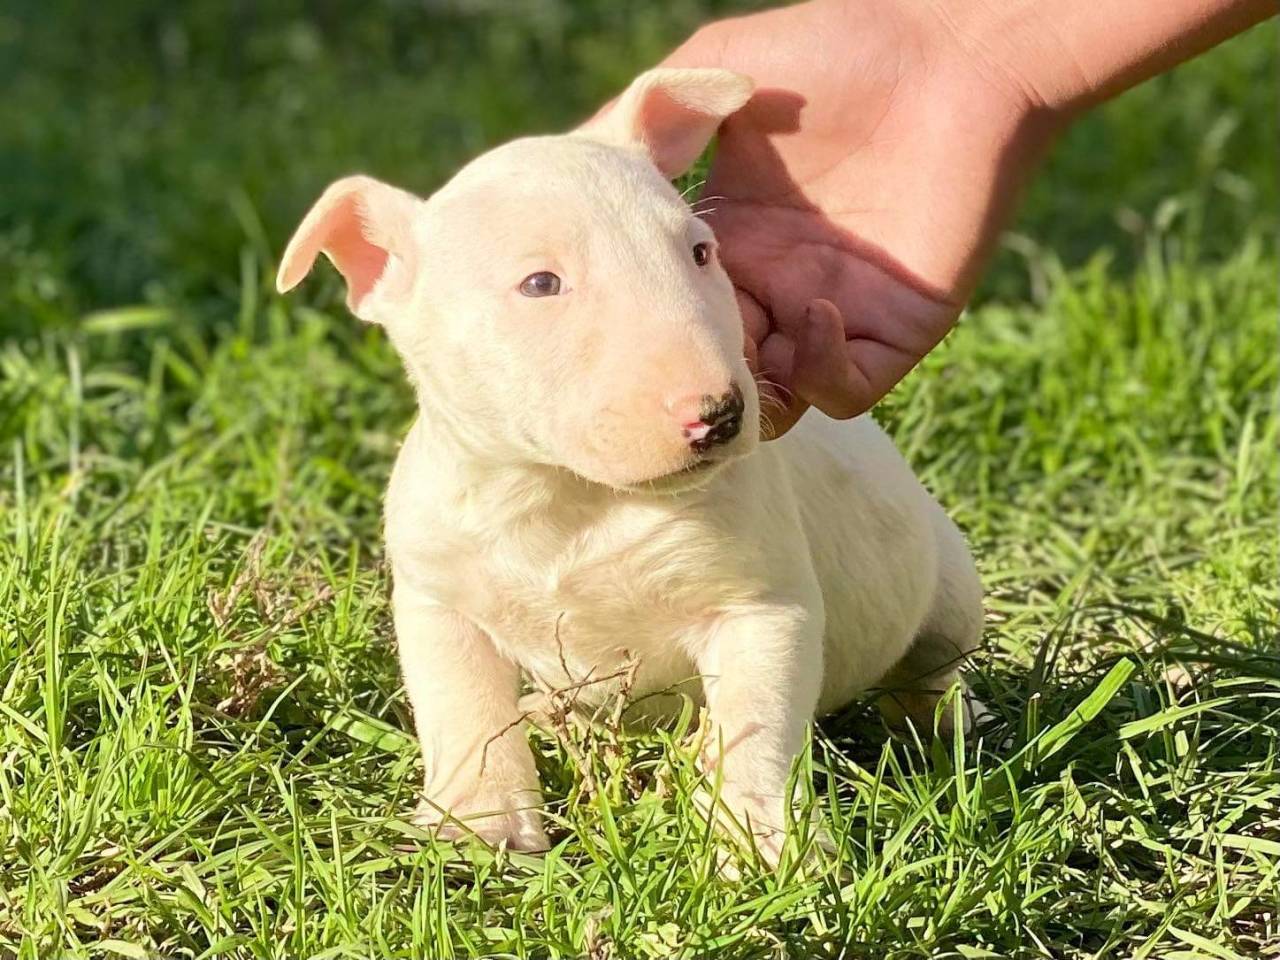 Bull Terrier named Unknown